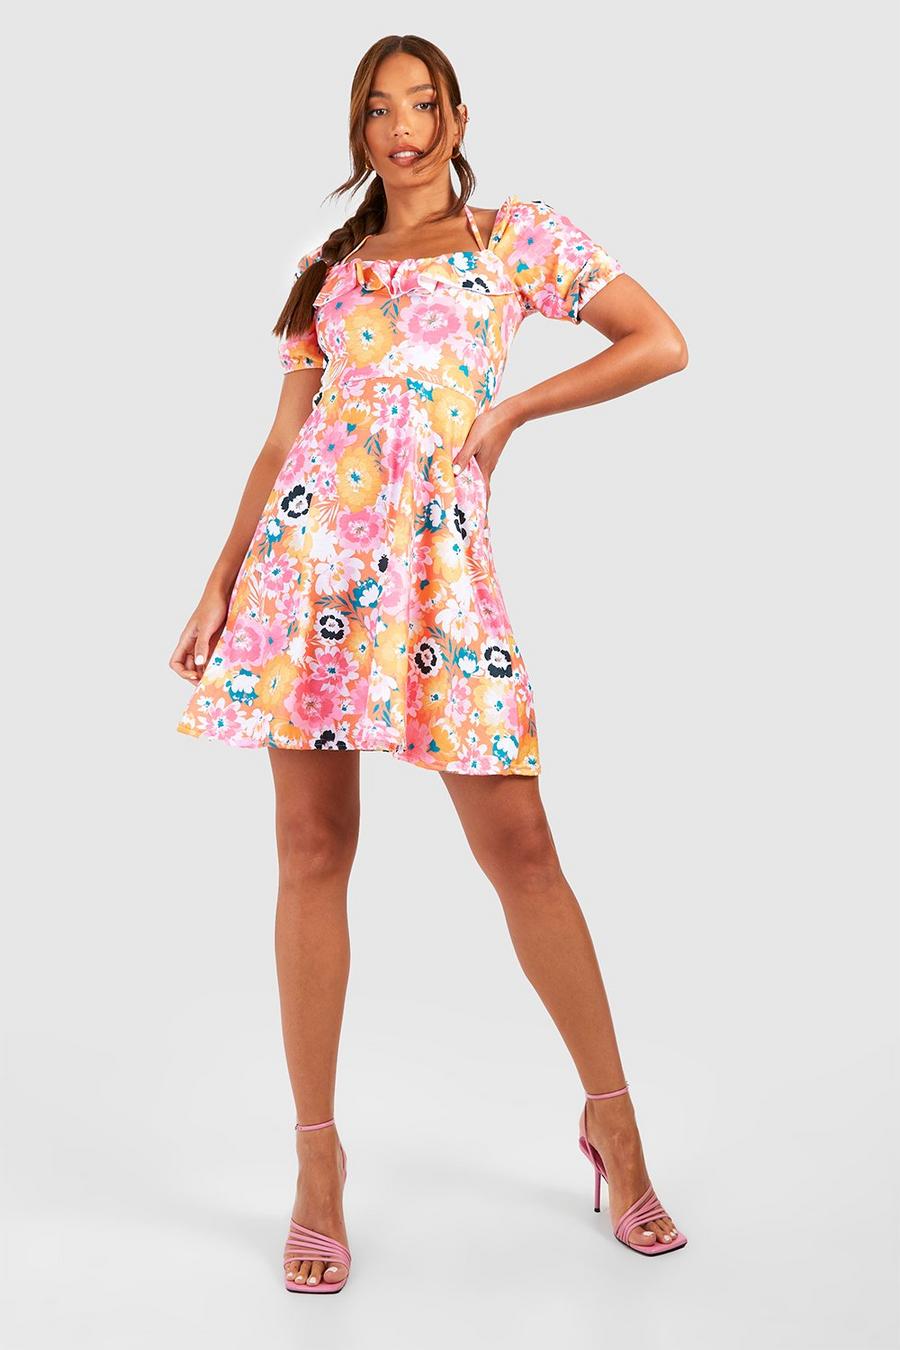 Pink rose Tall Bright Floral Ruffle Skater Dress